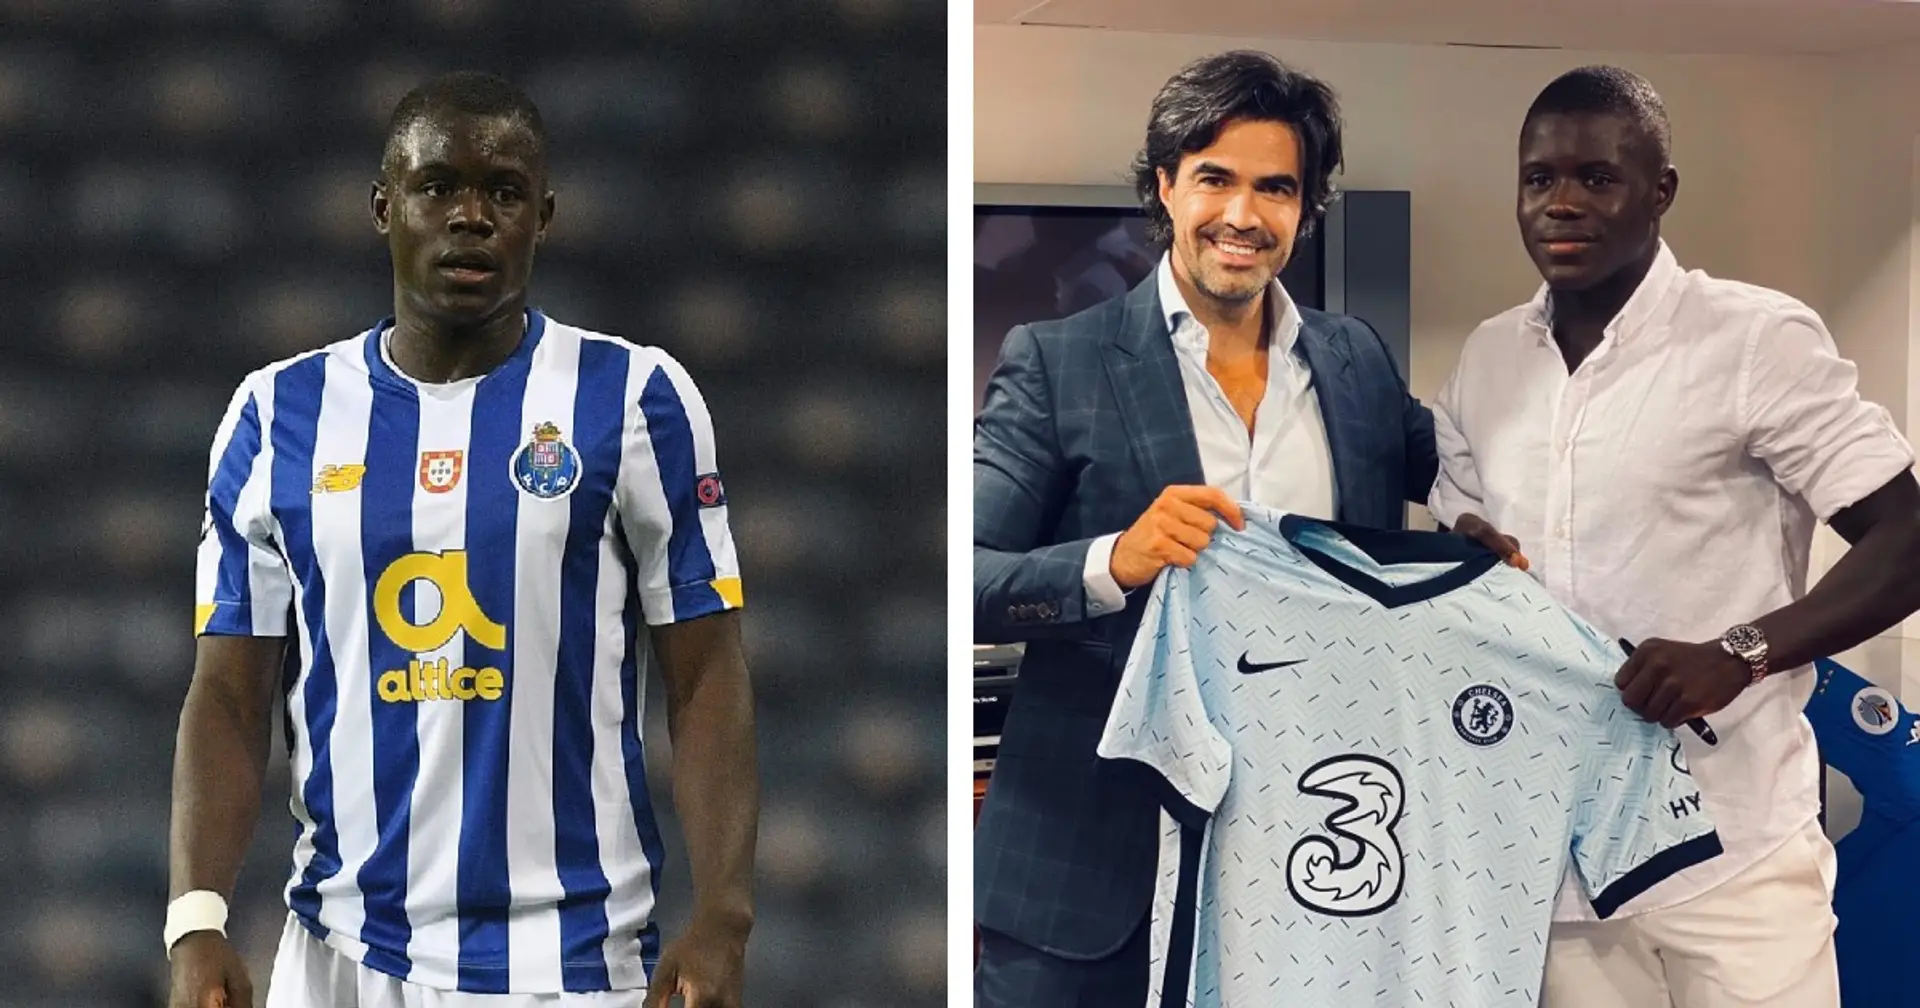 Fallen out of favour? Summer signing Malang Sarr's situation on loan at Porto in 2 points